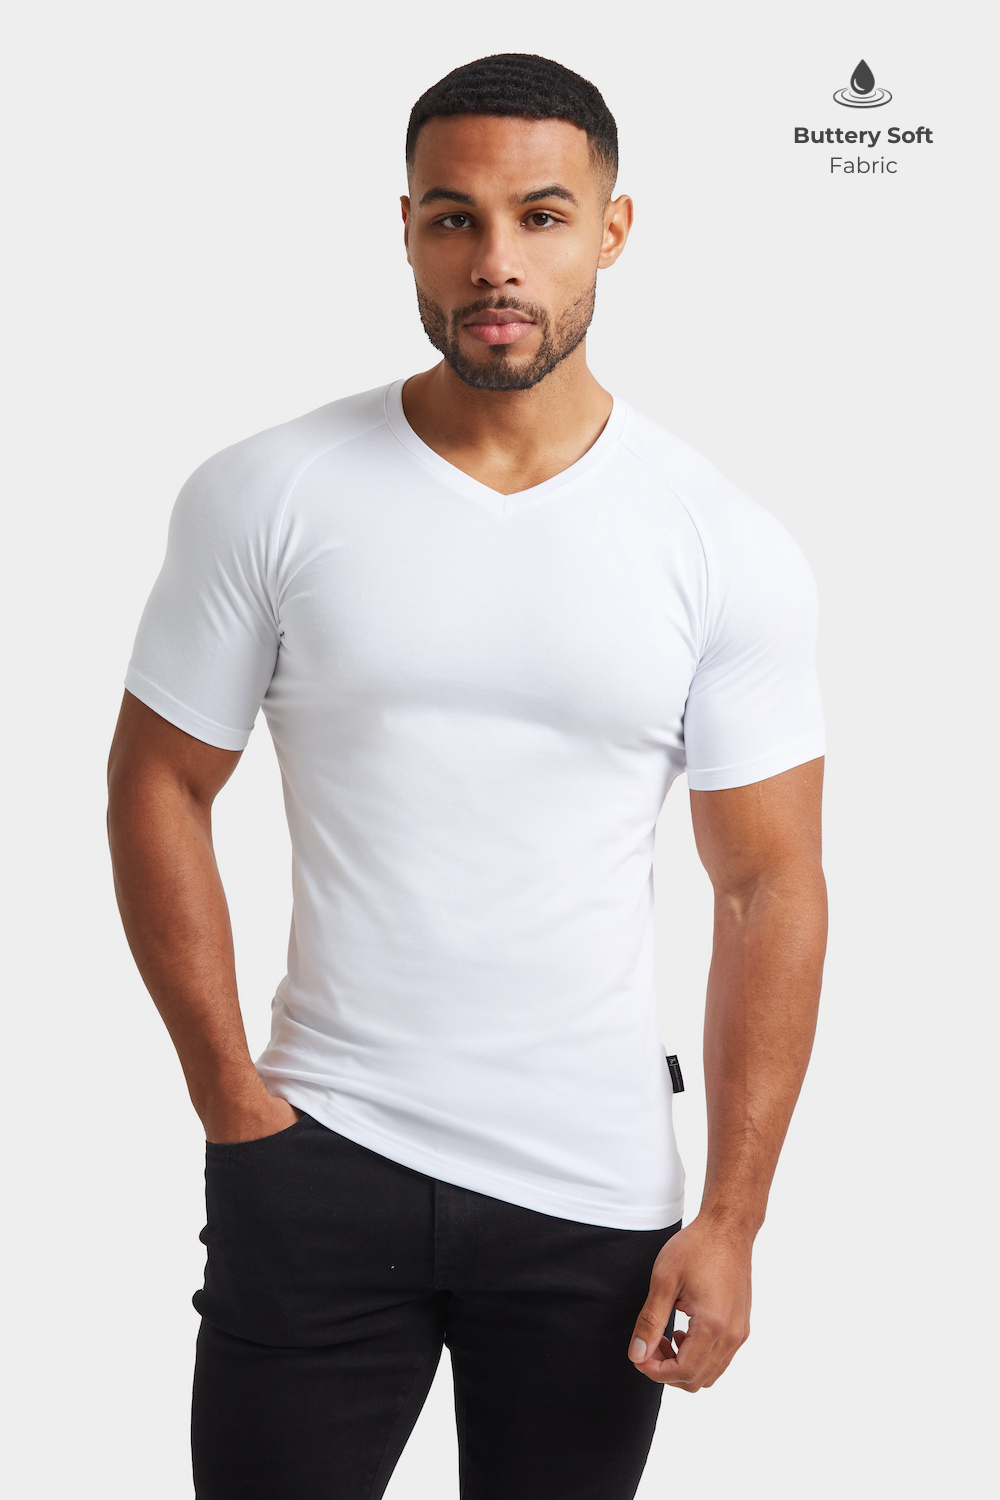 Premium Muscle Fit V-Neck in White - TAILORED ATHLETE - ROW